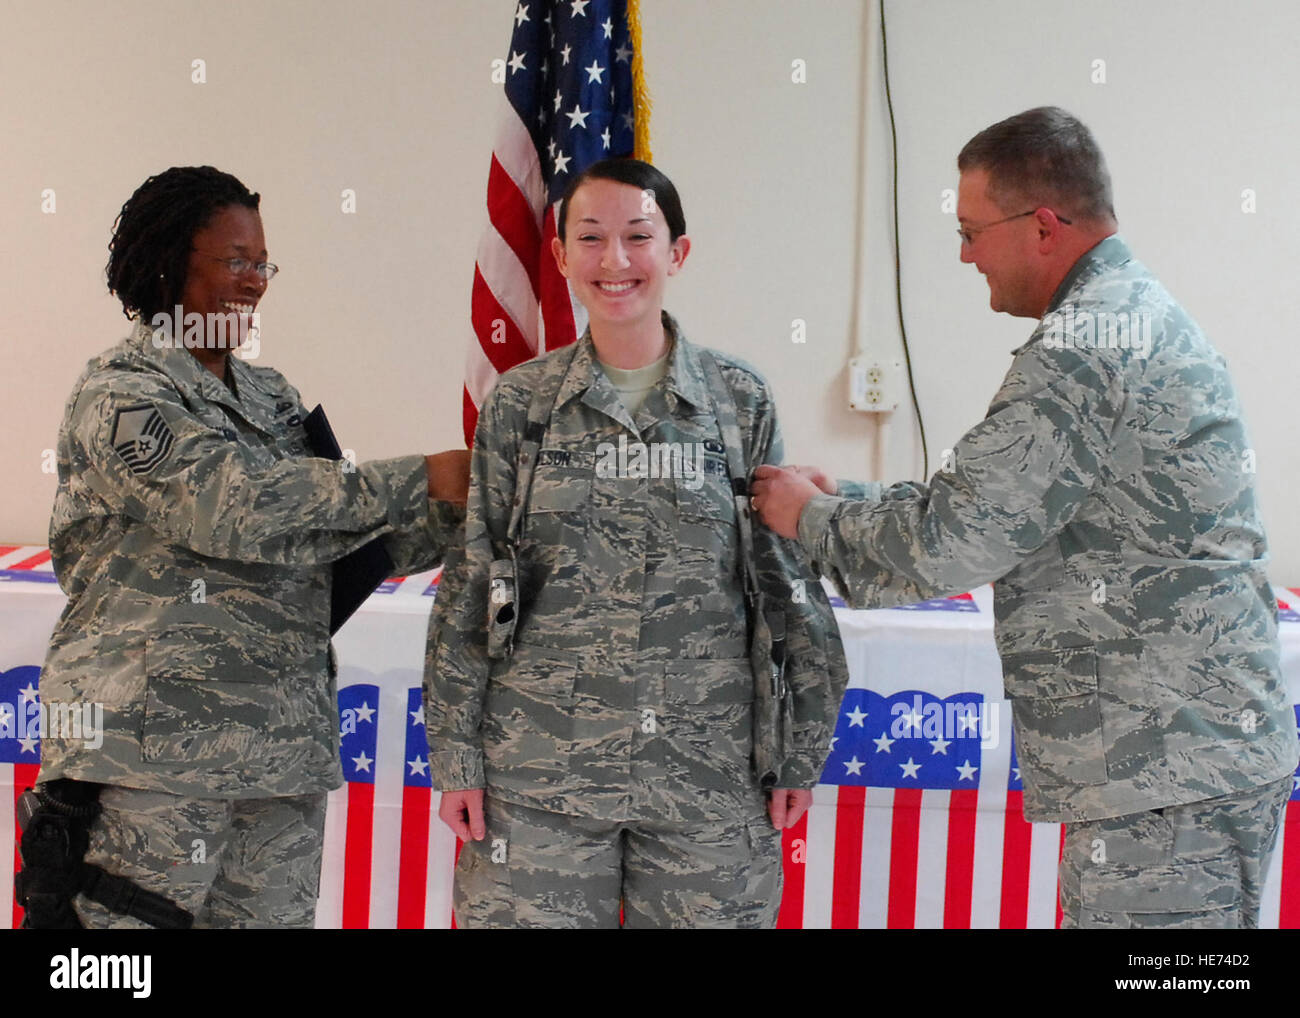 A ceremony was held for newly promoted Staff Sgt. Jessica Wilson (middle), a chaplain assistant from the 455th Air Expeditionary Wing, during a wing-staff luncheon, Nov. 1. Master Sgt. Nicole Nixon (left) and Lt. Col. Randall Kitchens (right) "tack on" stripes for Wilson. Wilson, a West Palm Beach, Fla., native, is deployed from Vance Air Force Base, Okla. Nixon, a chaplain assistant from the 455th AEW, is deployed from Ramstein Air Base, Germany, and hails from Chicago, Ill. Kitchens, a chaplain from the 455th AEW, is deployed from Peterson AFB, Colo., and hails from Macon, Ga. Stock Photo